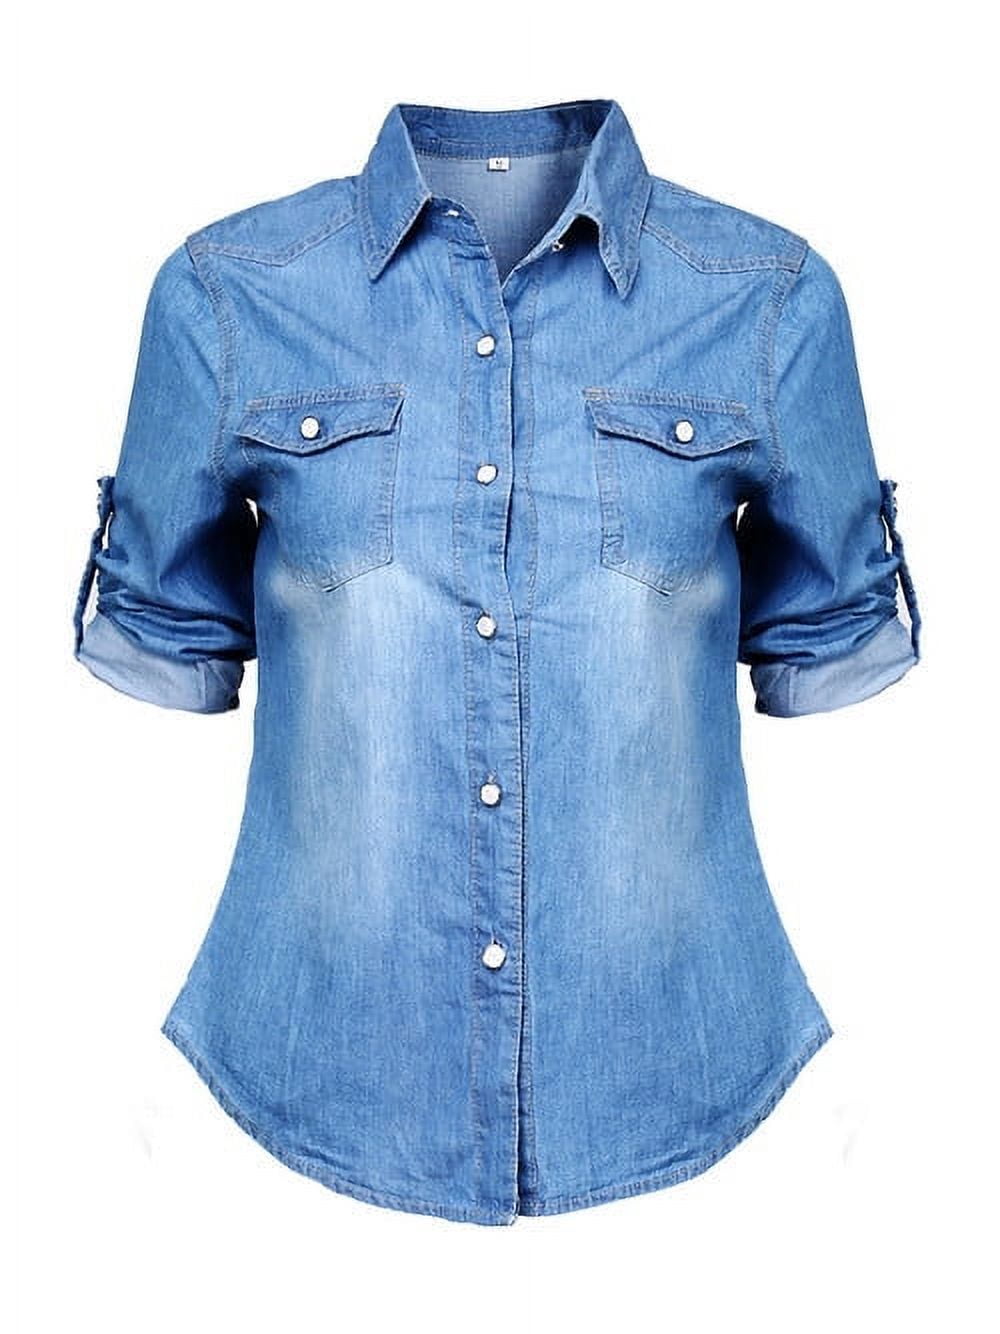 NEW Womens Denim Shirt Ladies Classic Fitted Shirts Size 8 10 12 14 ...